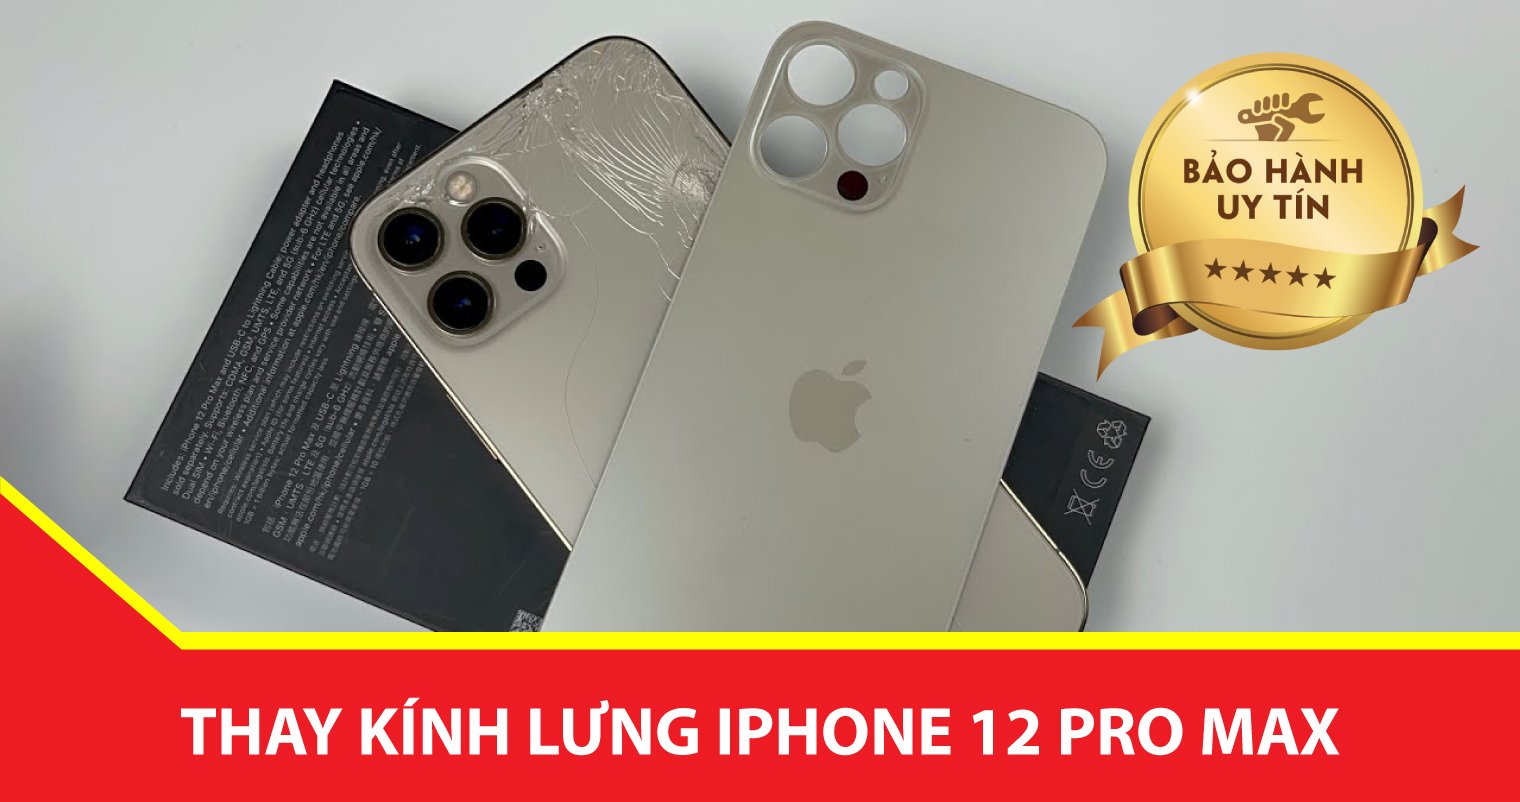 thay kinh lung iphone 12 pro max